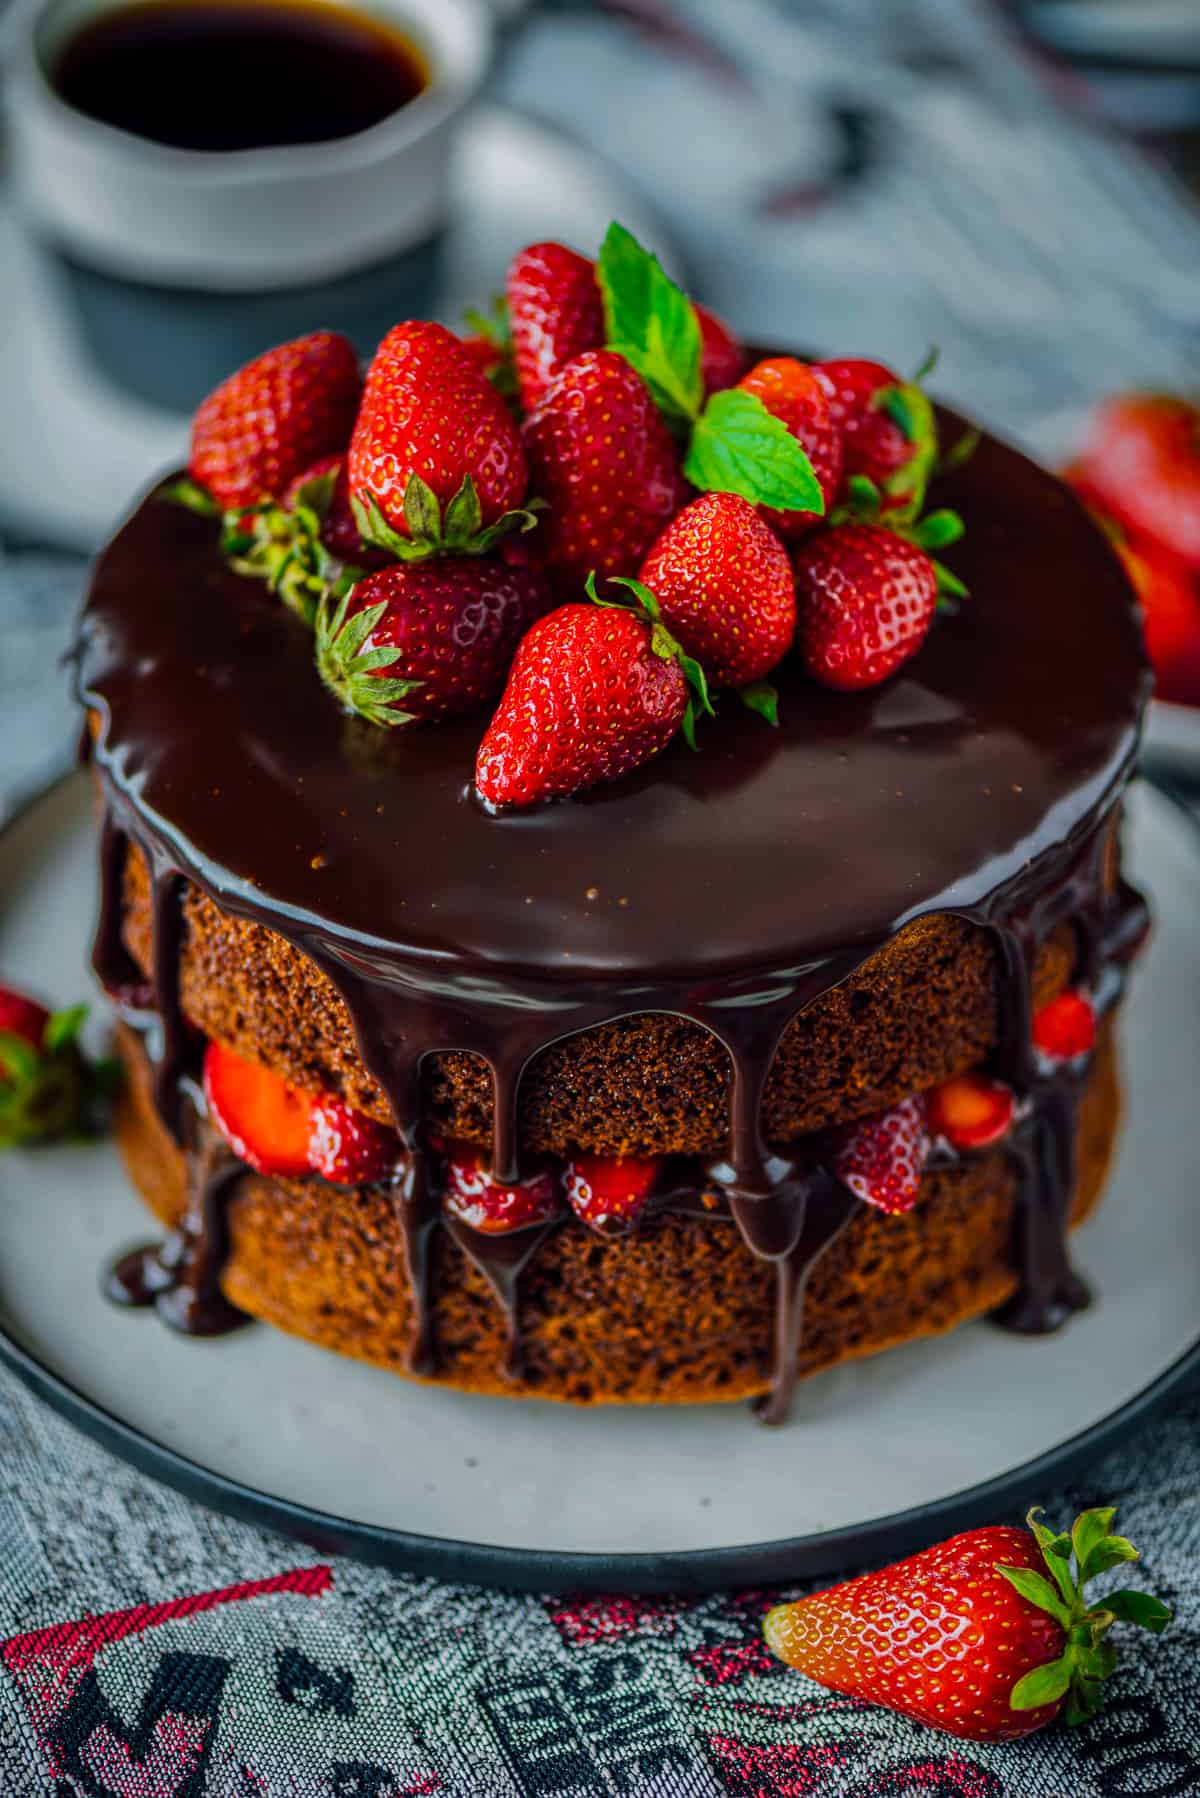 Chocolate cake with ganache and whole strawberries on the top.